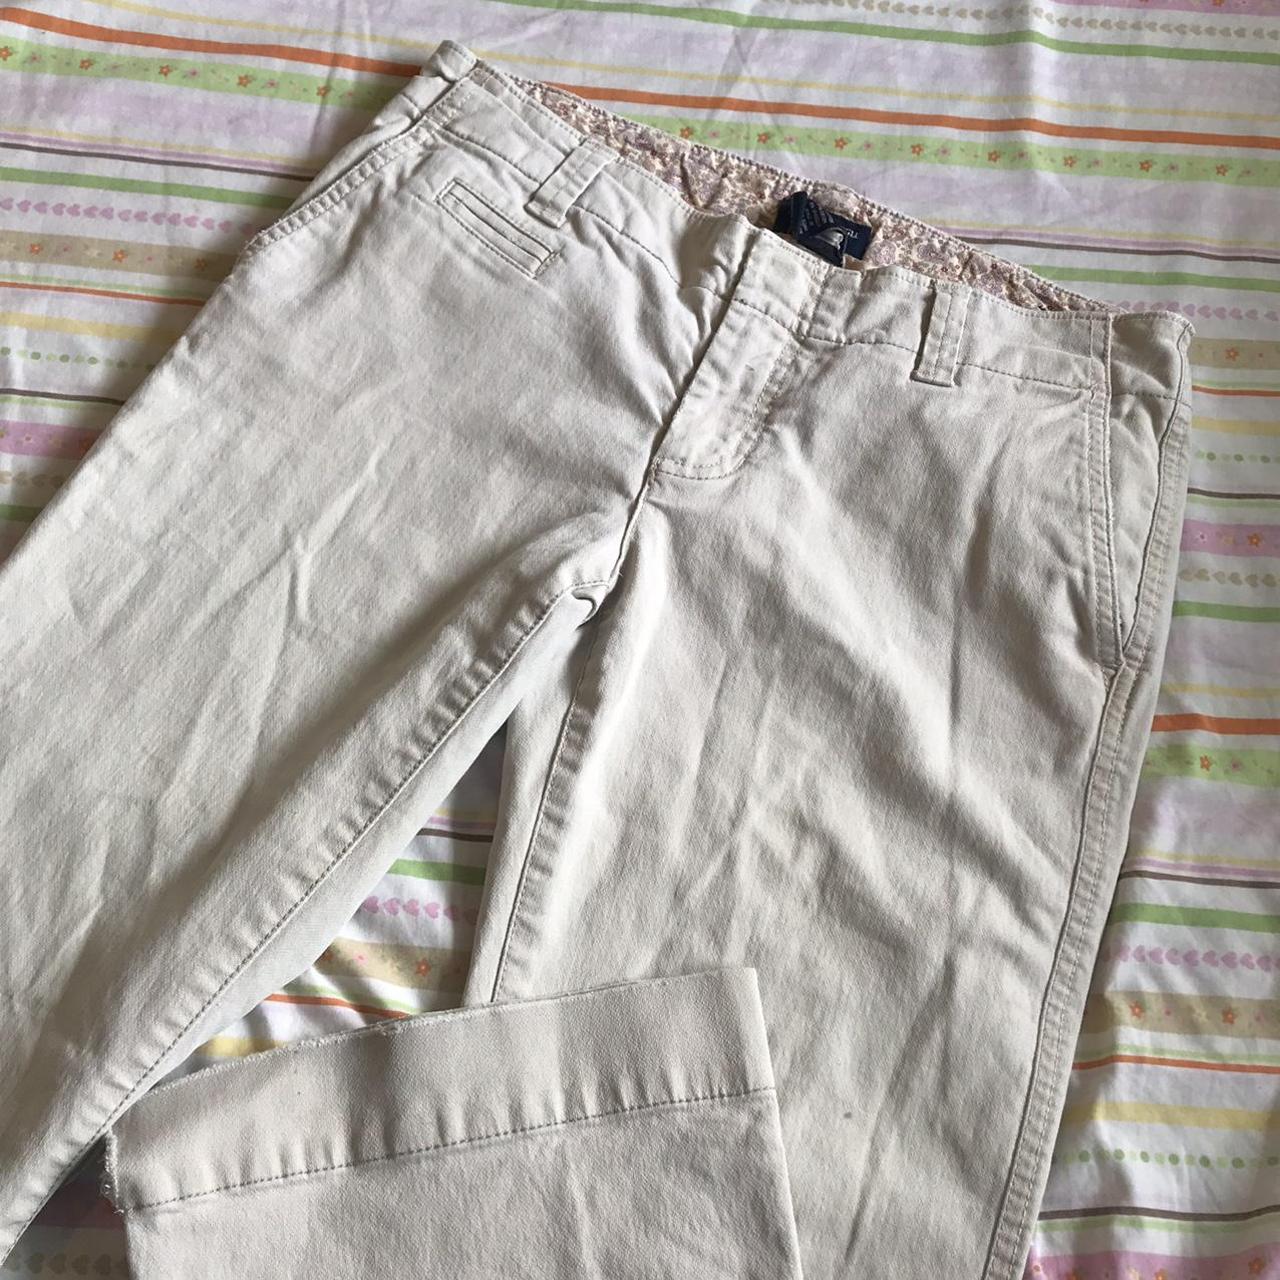 These pants are adorable, and have a cute ... - Depop